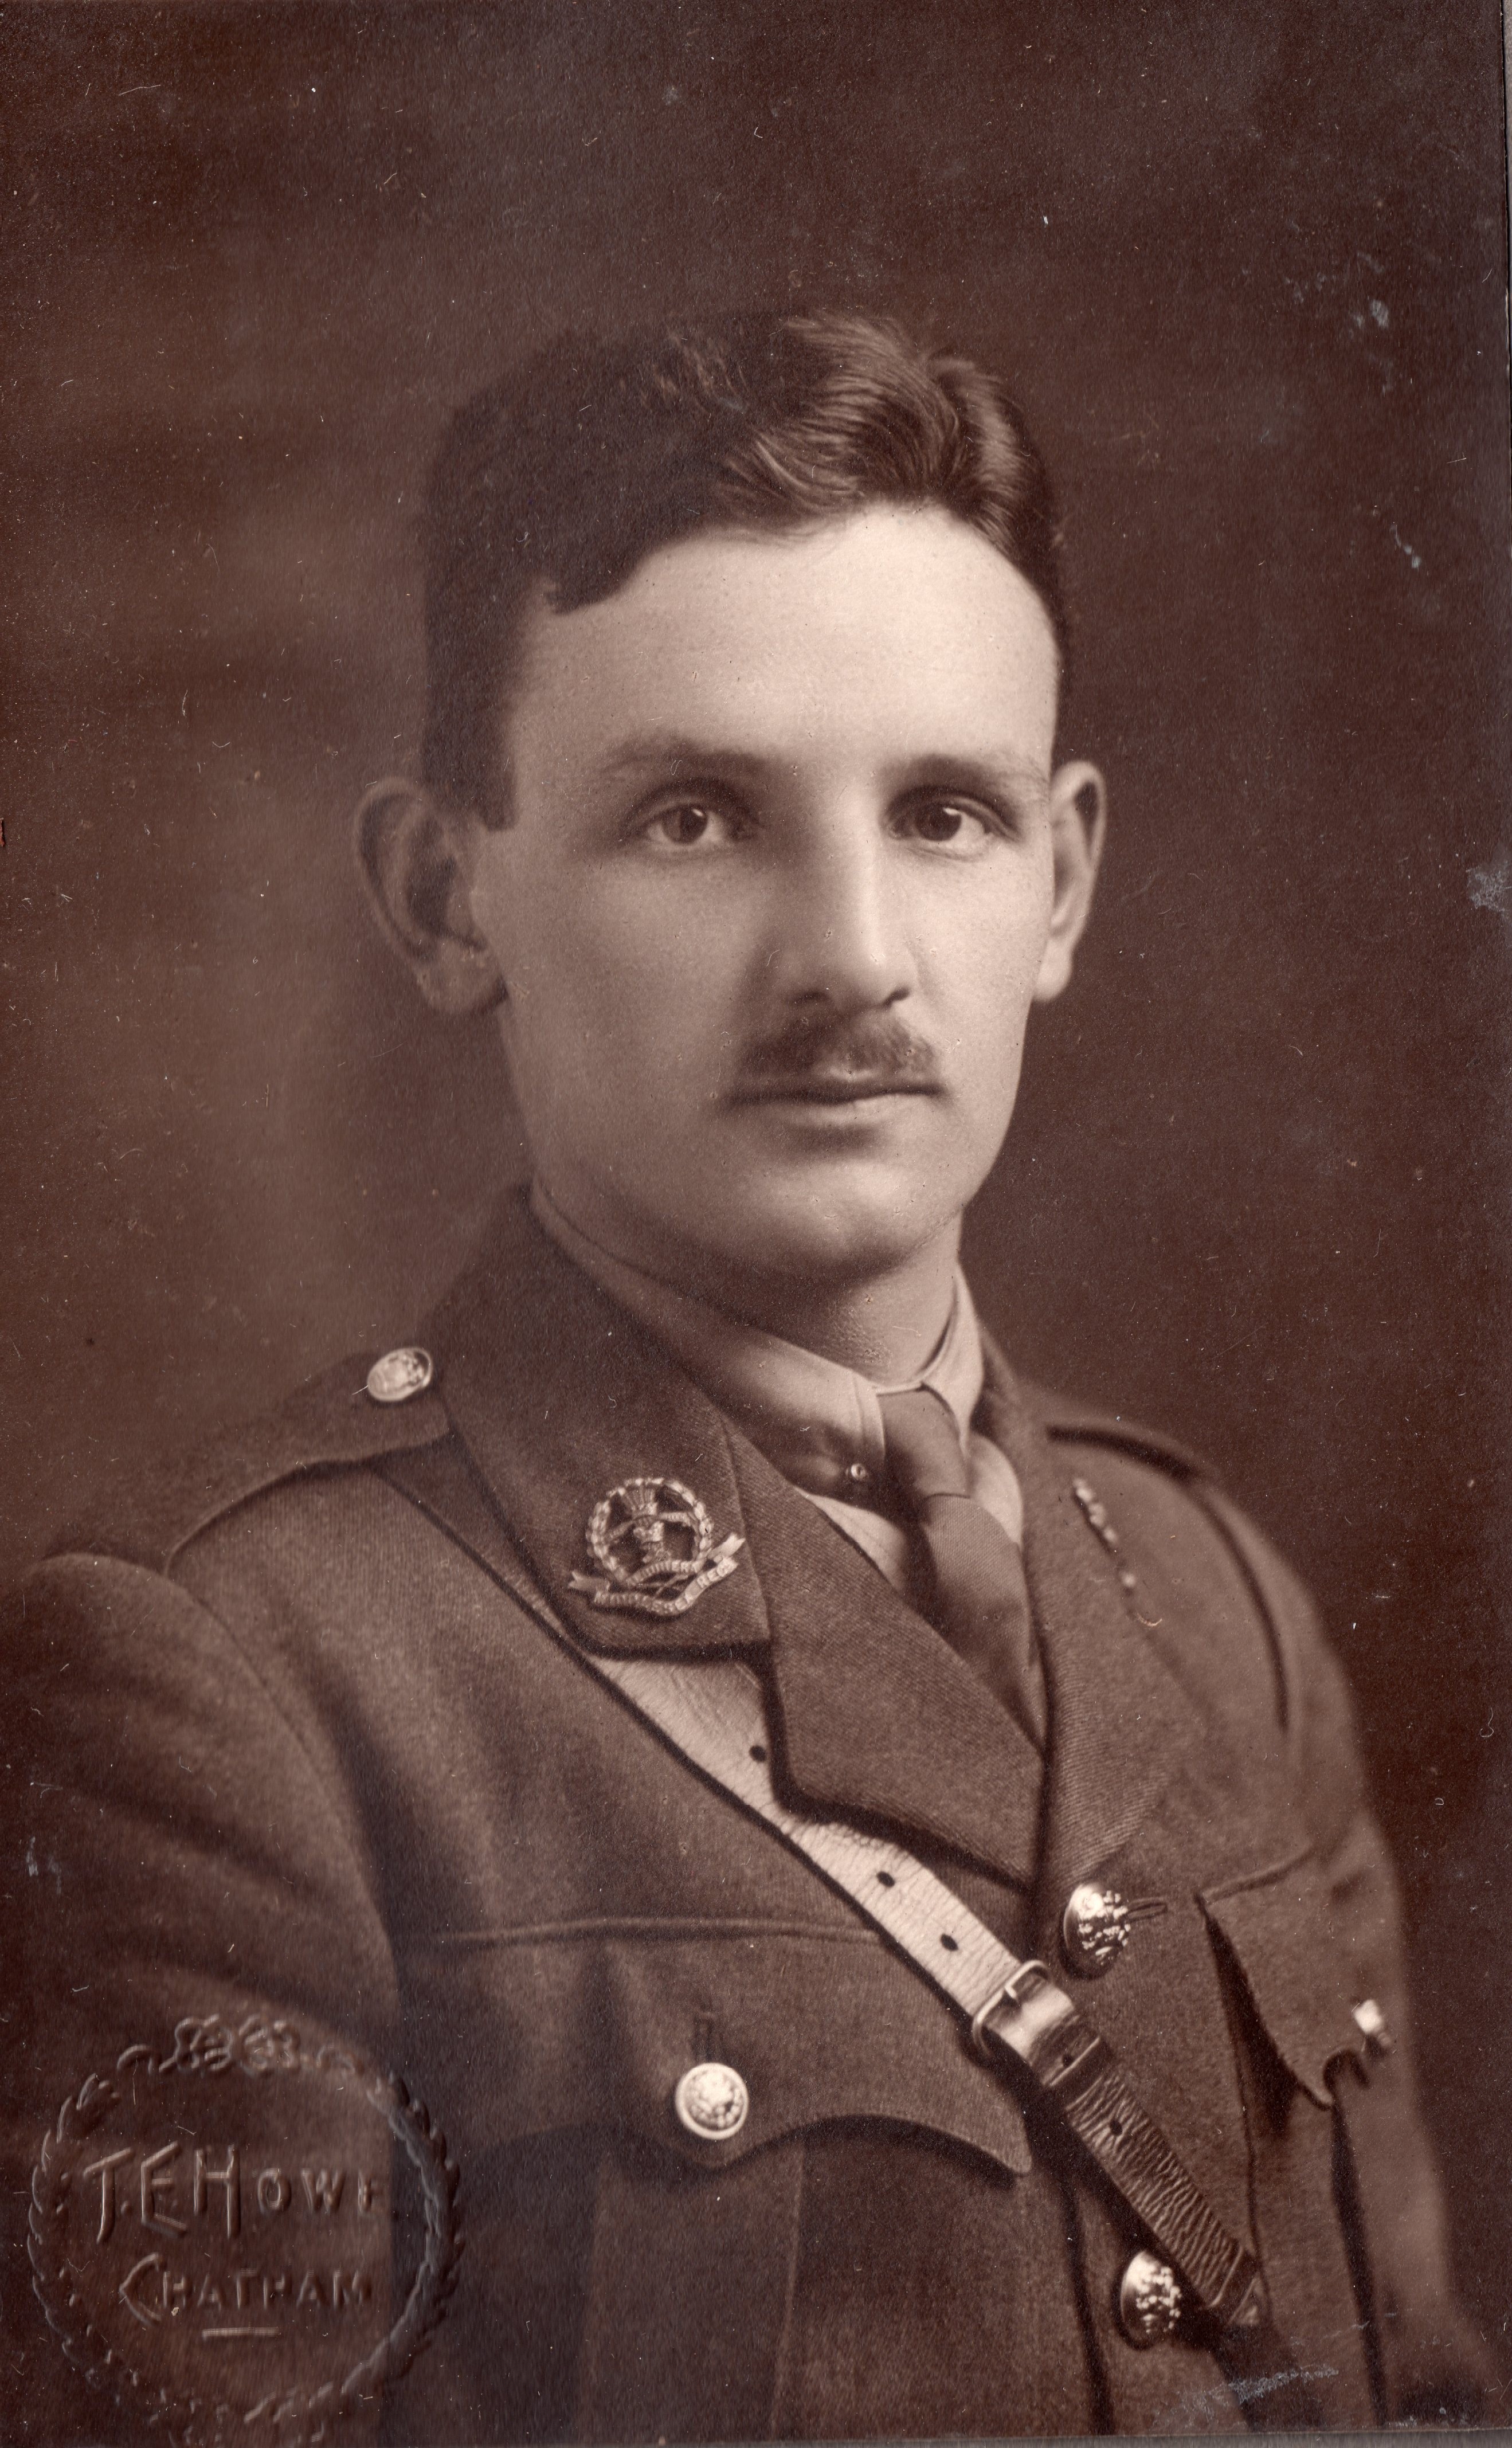 2nd Lt. Ronald Edwin Grundy was 19 years old when he was leading a platoon of the 2nd Battalion Middlesex Regiment on the 1st July 1916. - ronald-grundy002